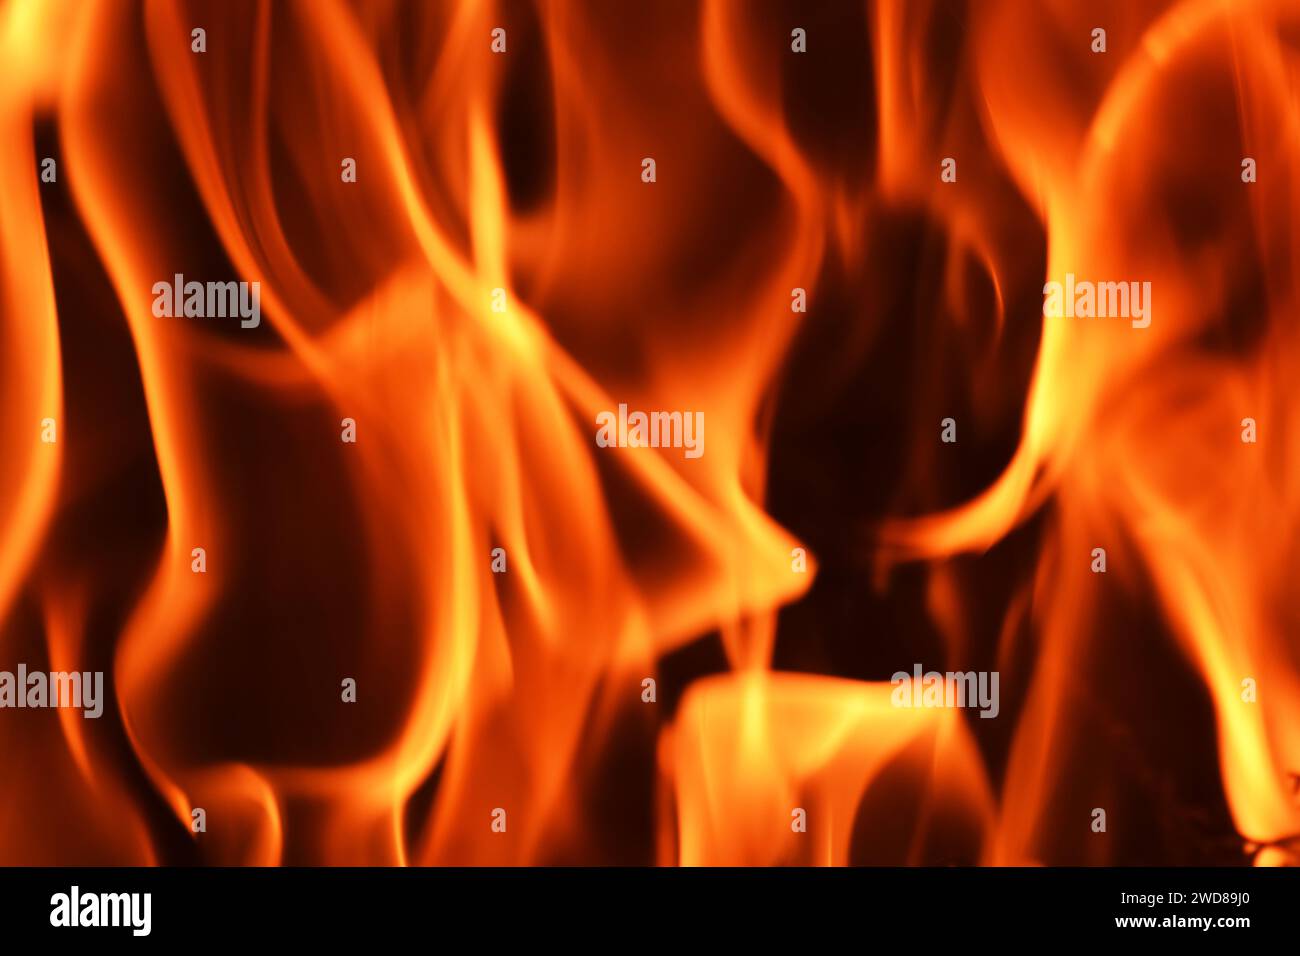 Flames of fire, the rapid oxidation of fuel, releasing heat, light, flames. The flame is the visible portion of fire with various colors and intensity Stock Photo